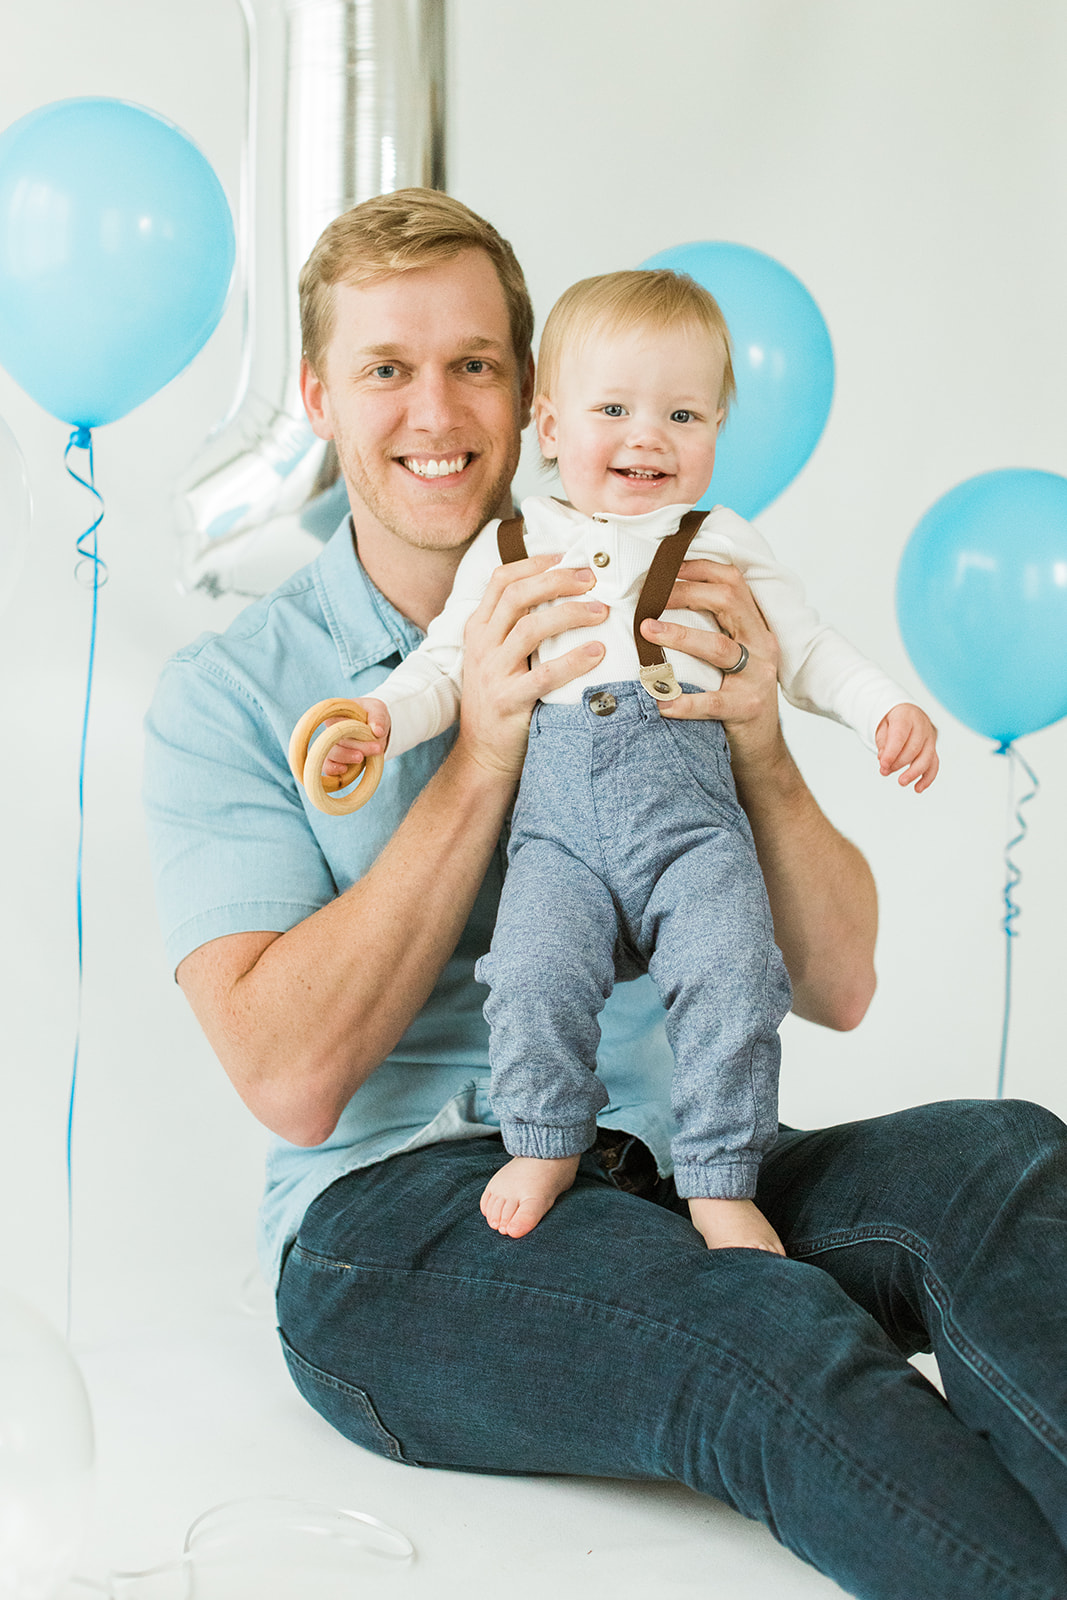 1 year old photo shoot in nashville tennessee. dad and son. birthday balloons in studio